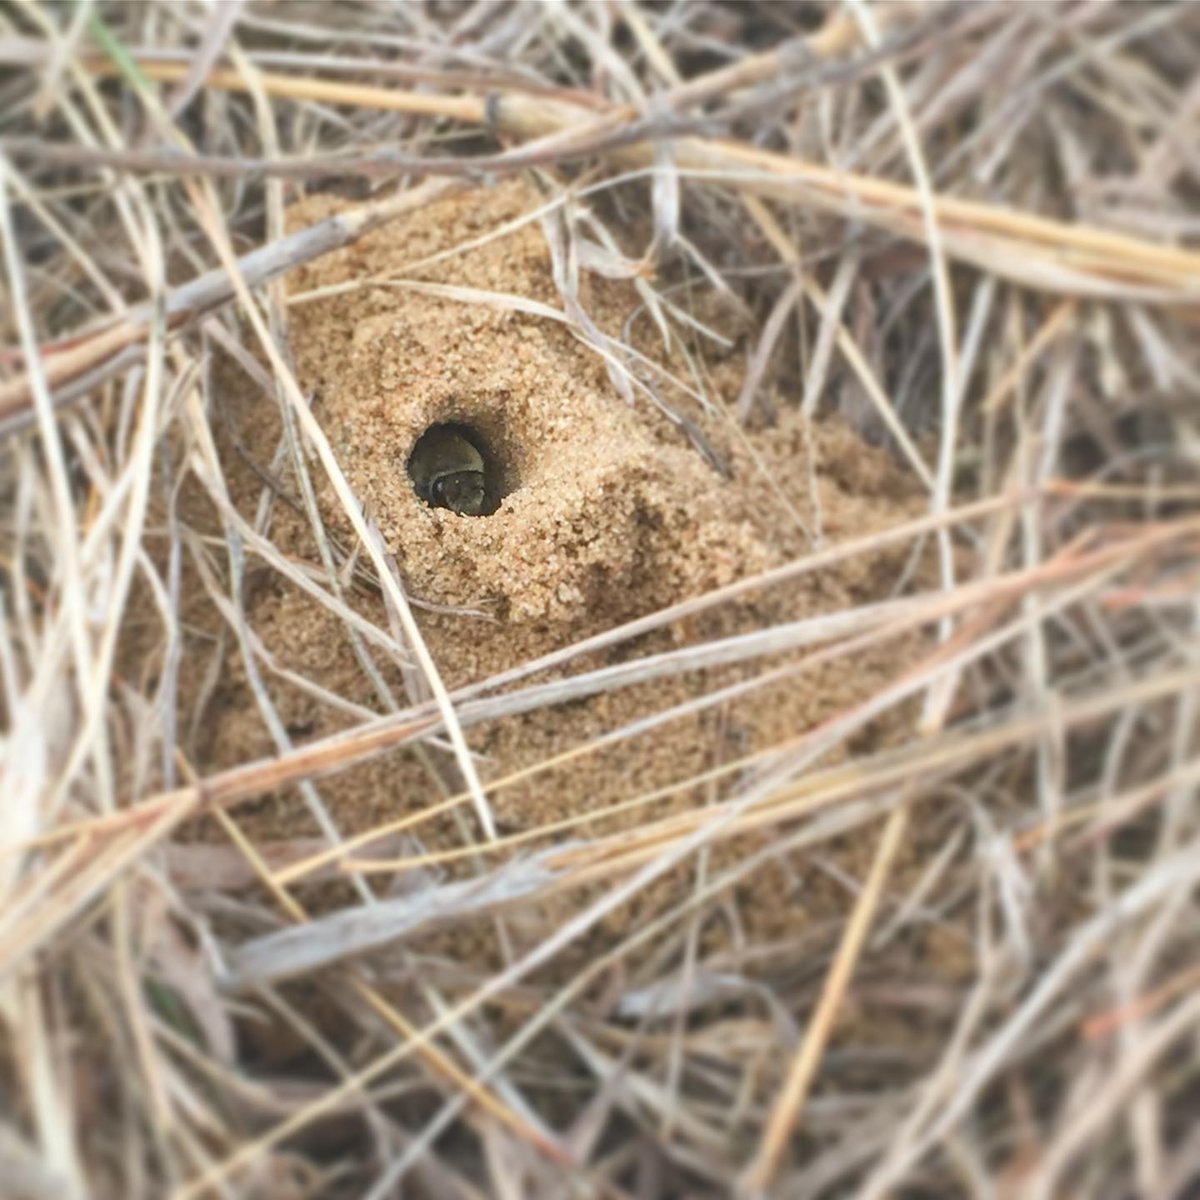 Despite the fact that over 70% of bees nest underground, there is a huge gap in our understanding of where they nest. Without this information, our  #wildbee conservation efforts are limited.